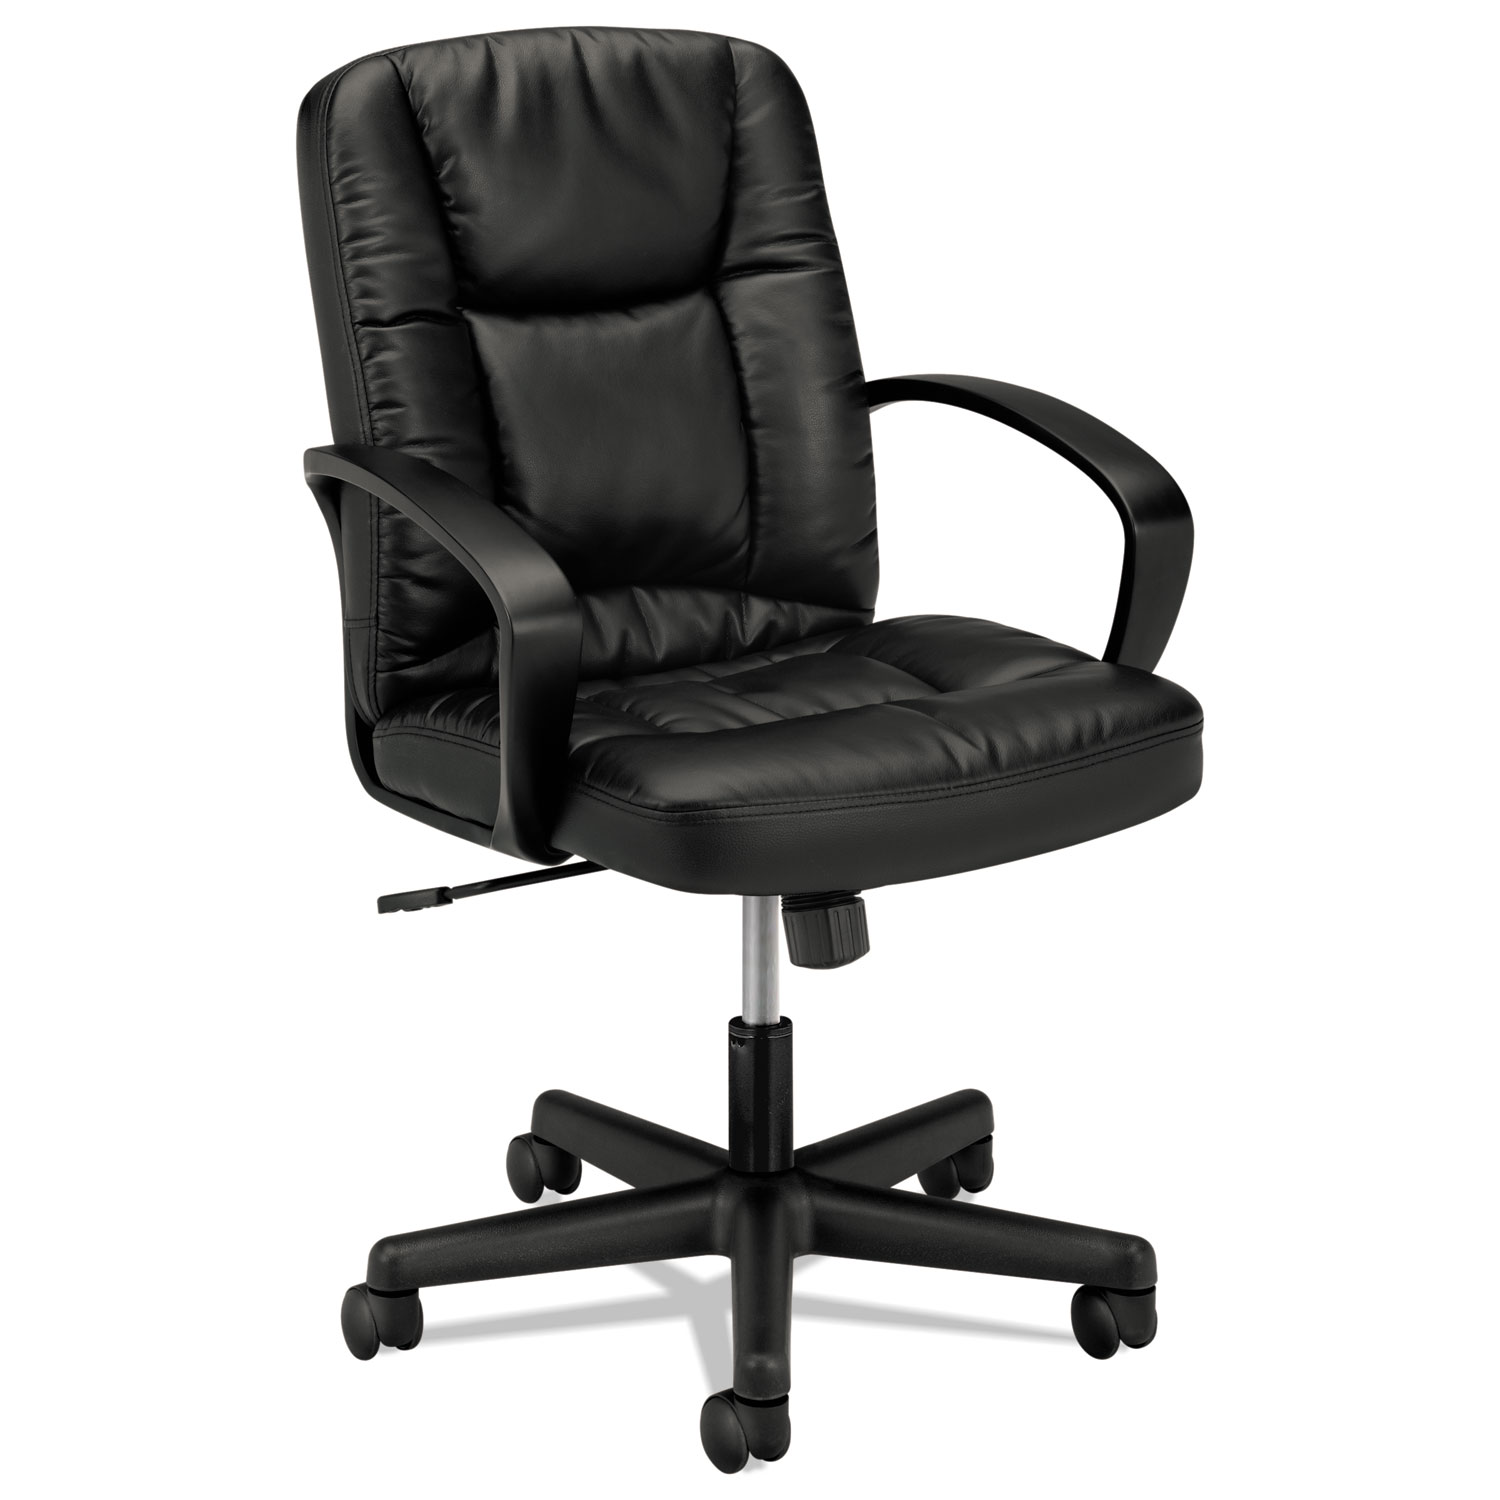  HON HVL171.SB11 HVL171 Executive Mid-Back Leather Chair, Supports up to 250 lbs., Black Seat/Black Back, Black Base (BSXVL171SB11) 